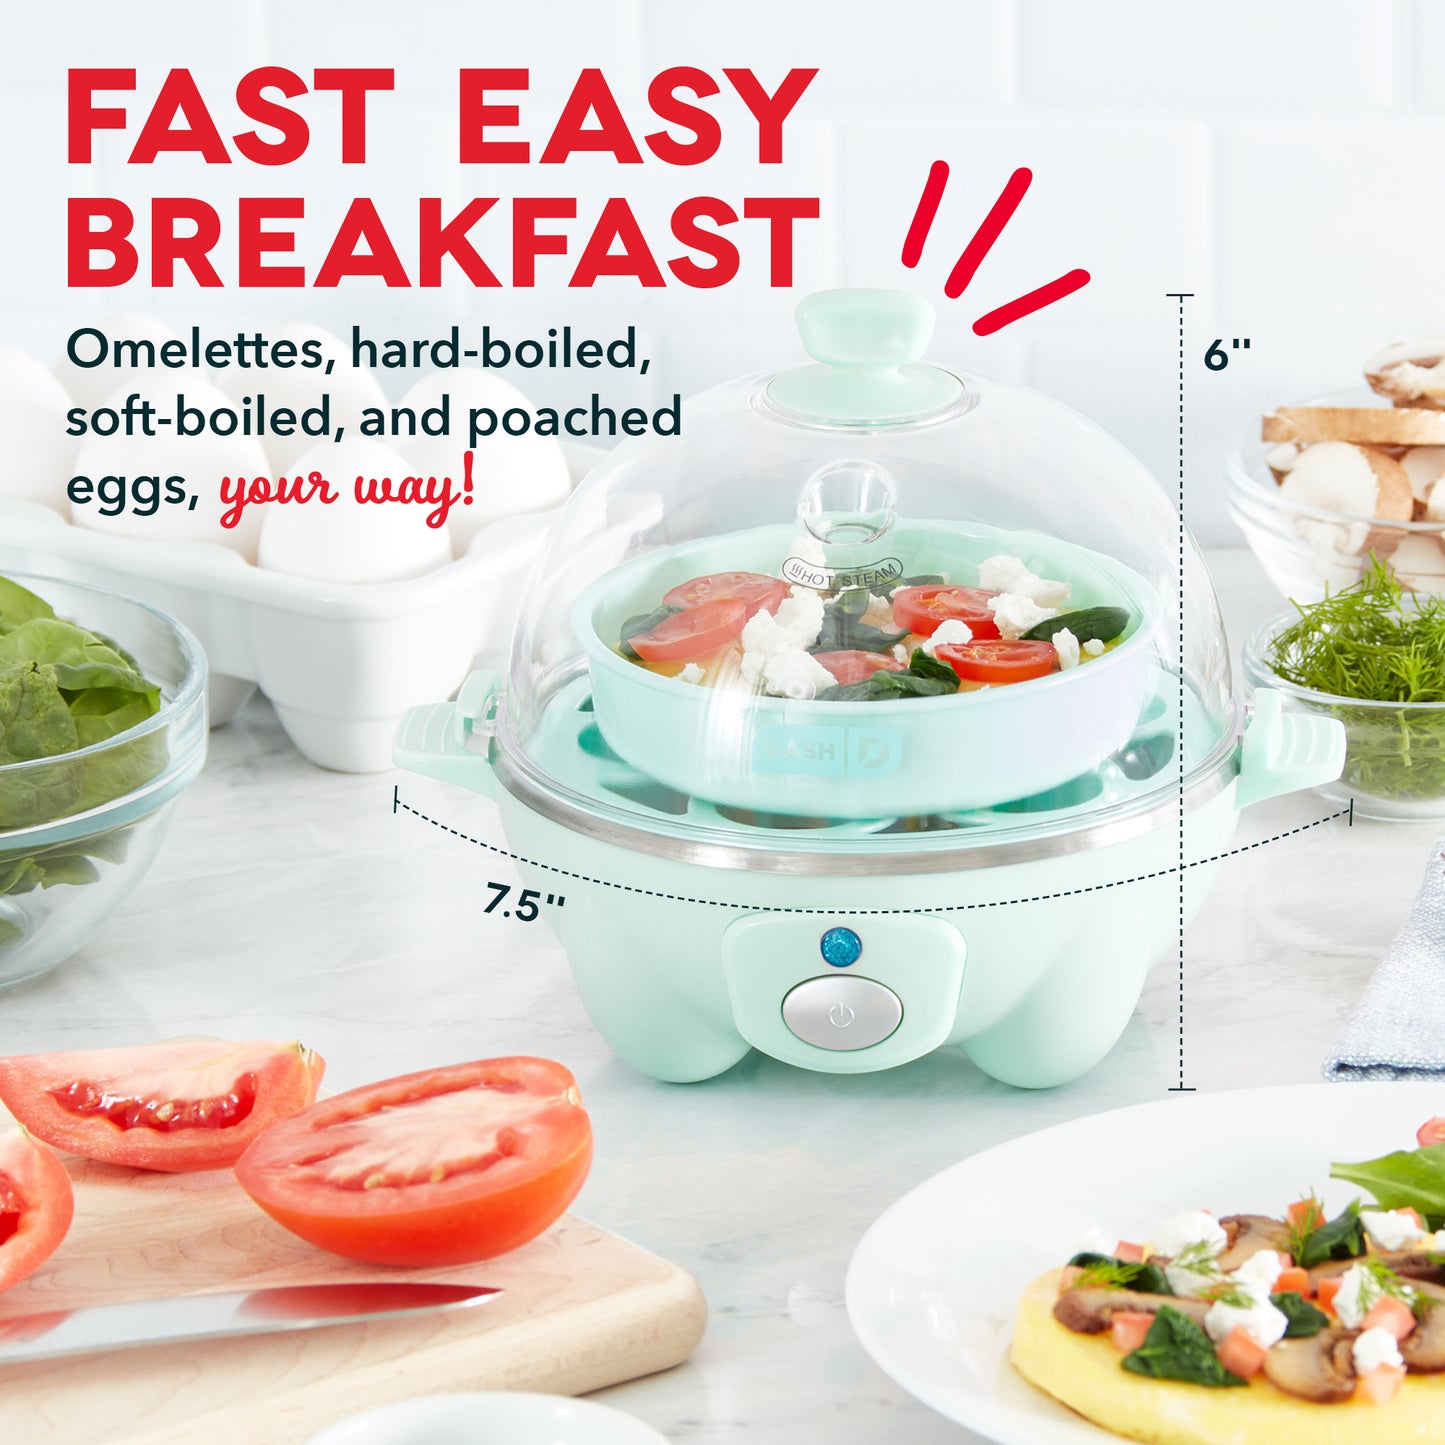 Dash Rapid Egg Cooker: 6 Egg Capacity Electric Egg Cooker for Hard Boiled Eggs, Poached Eggs, Scrambled Eggs, or Omelets with Auto Shut Off Feature